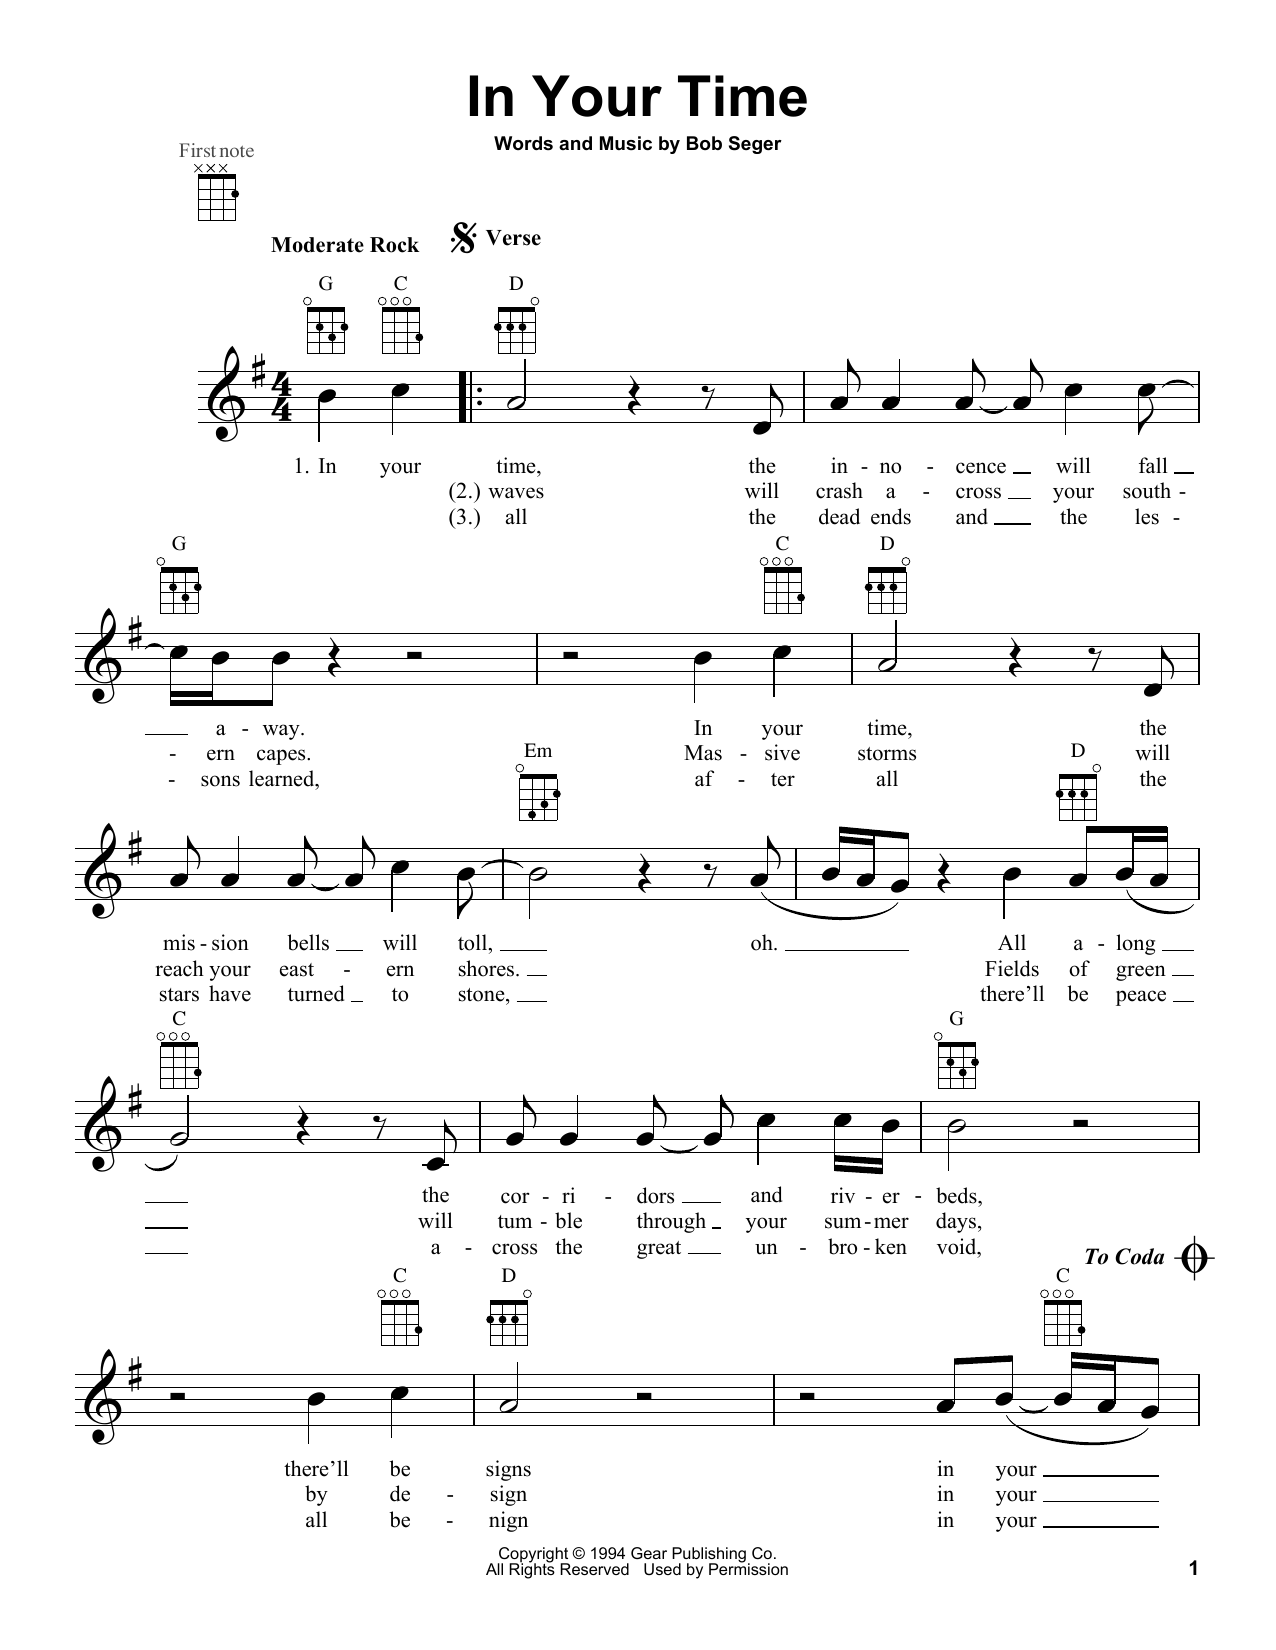 Download Bob Seger In Your Time Sheet Music